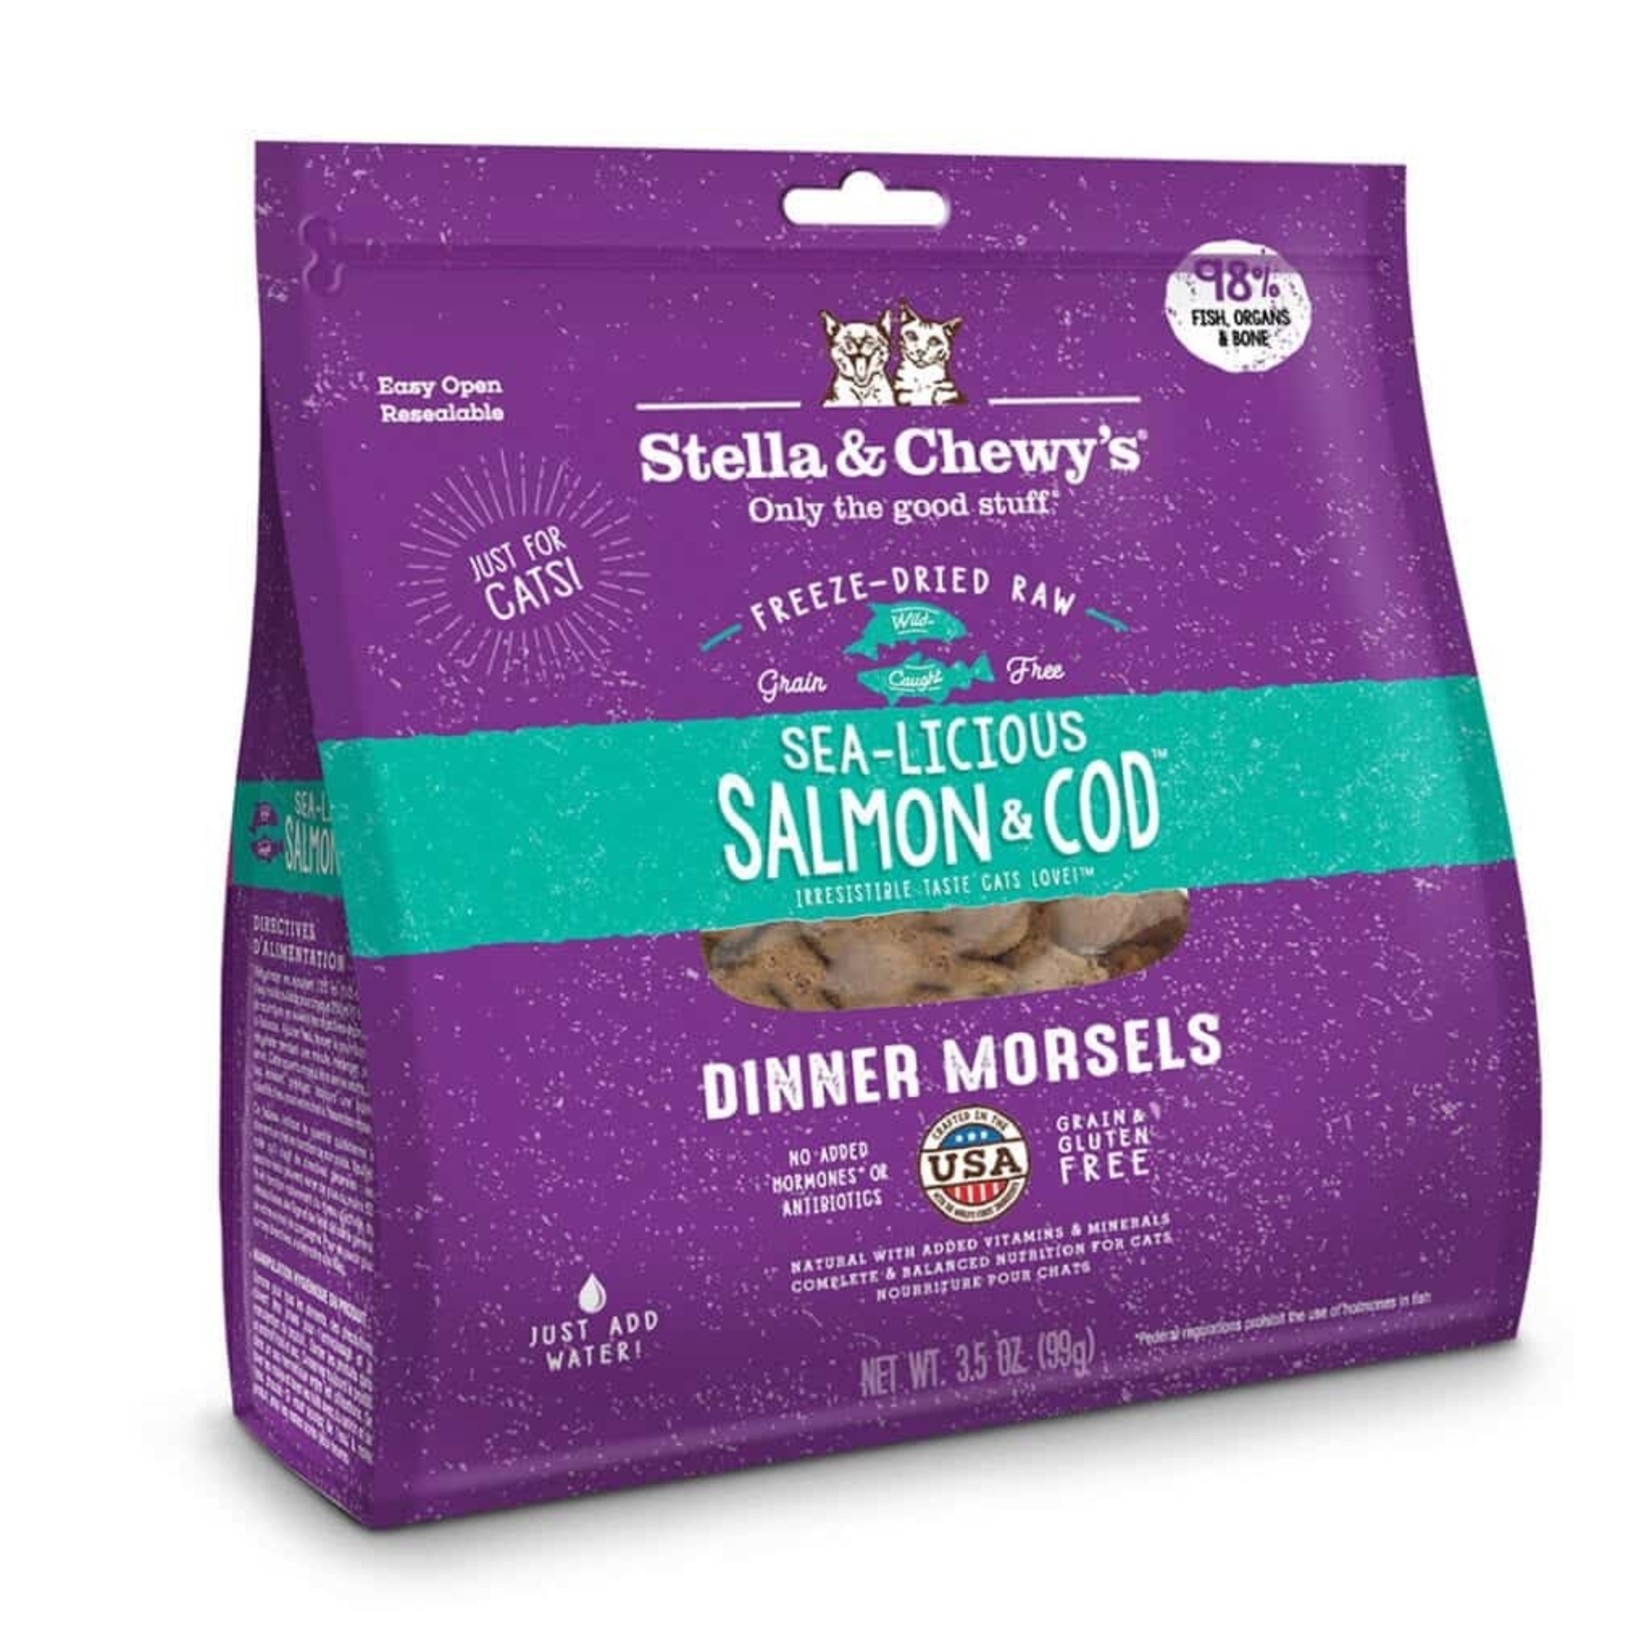 Stella & Chewy's Cat Sea-Licious Salmon & Cod Freeze-Dried Raw Dinner Morsels 8oz